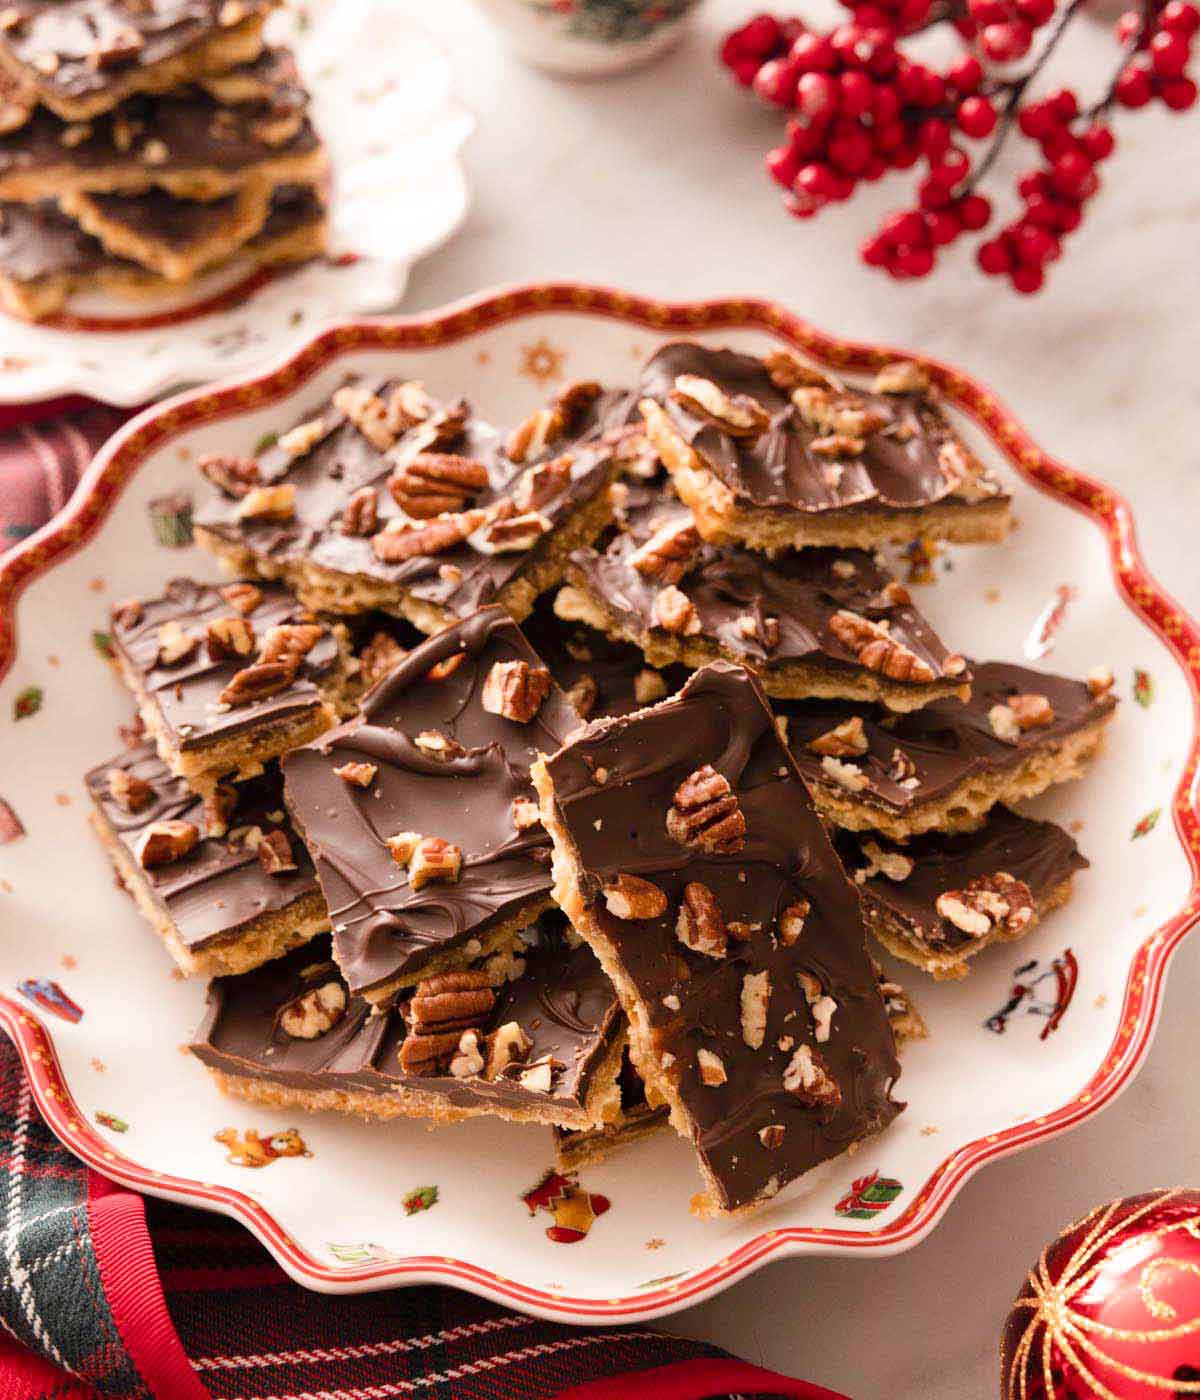 A festive plate with a pile of chocolate Christmas cracker candy.